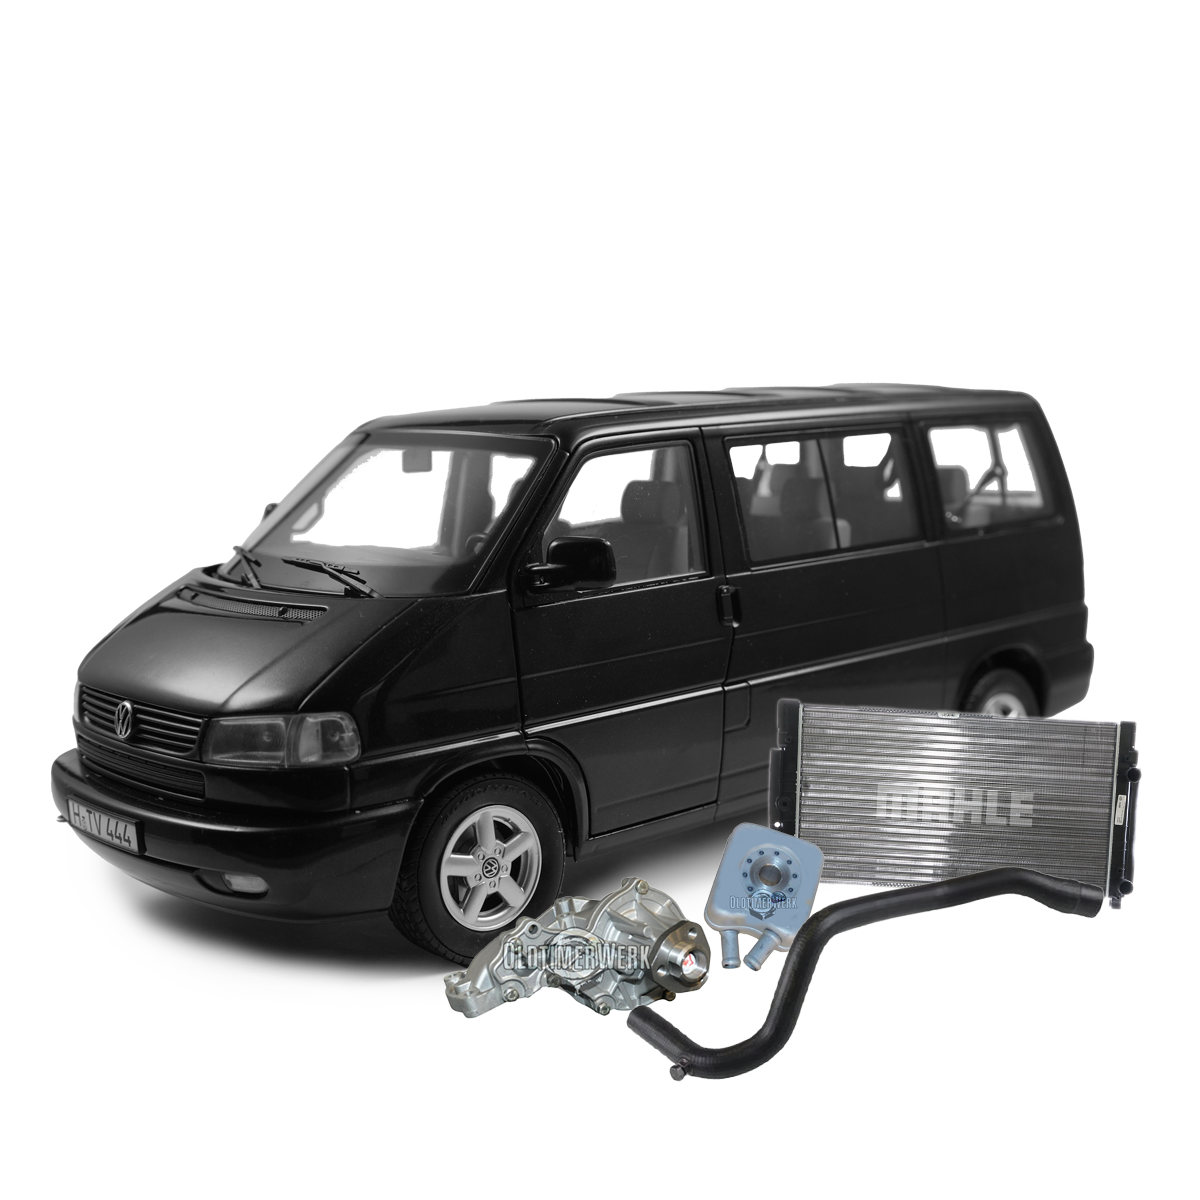 VW_T4_Ku-hlung